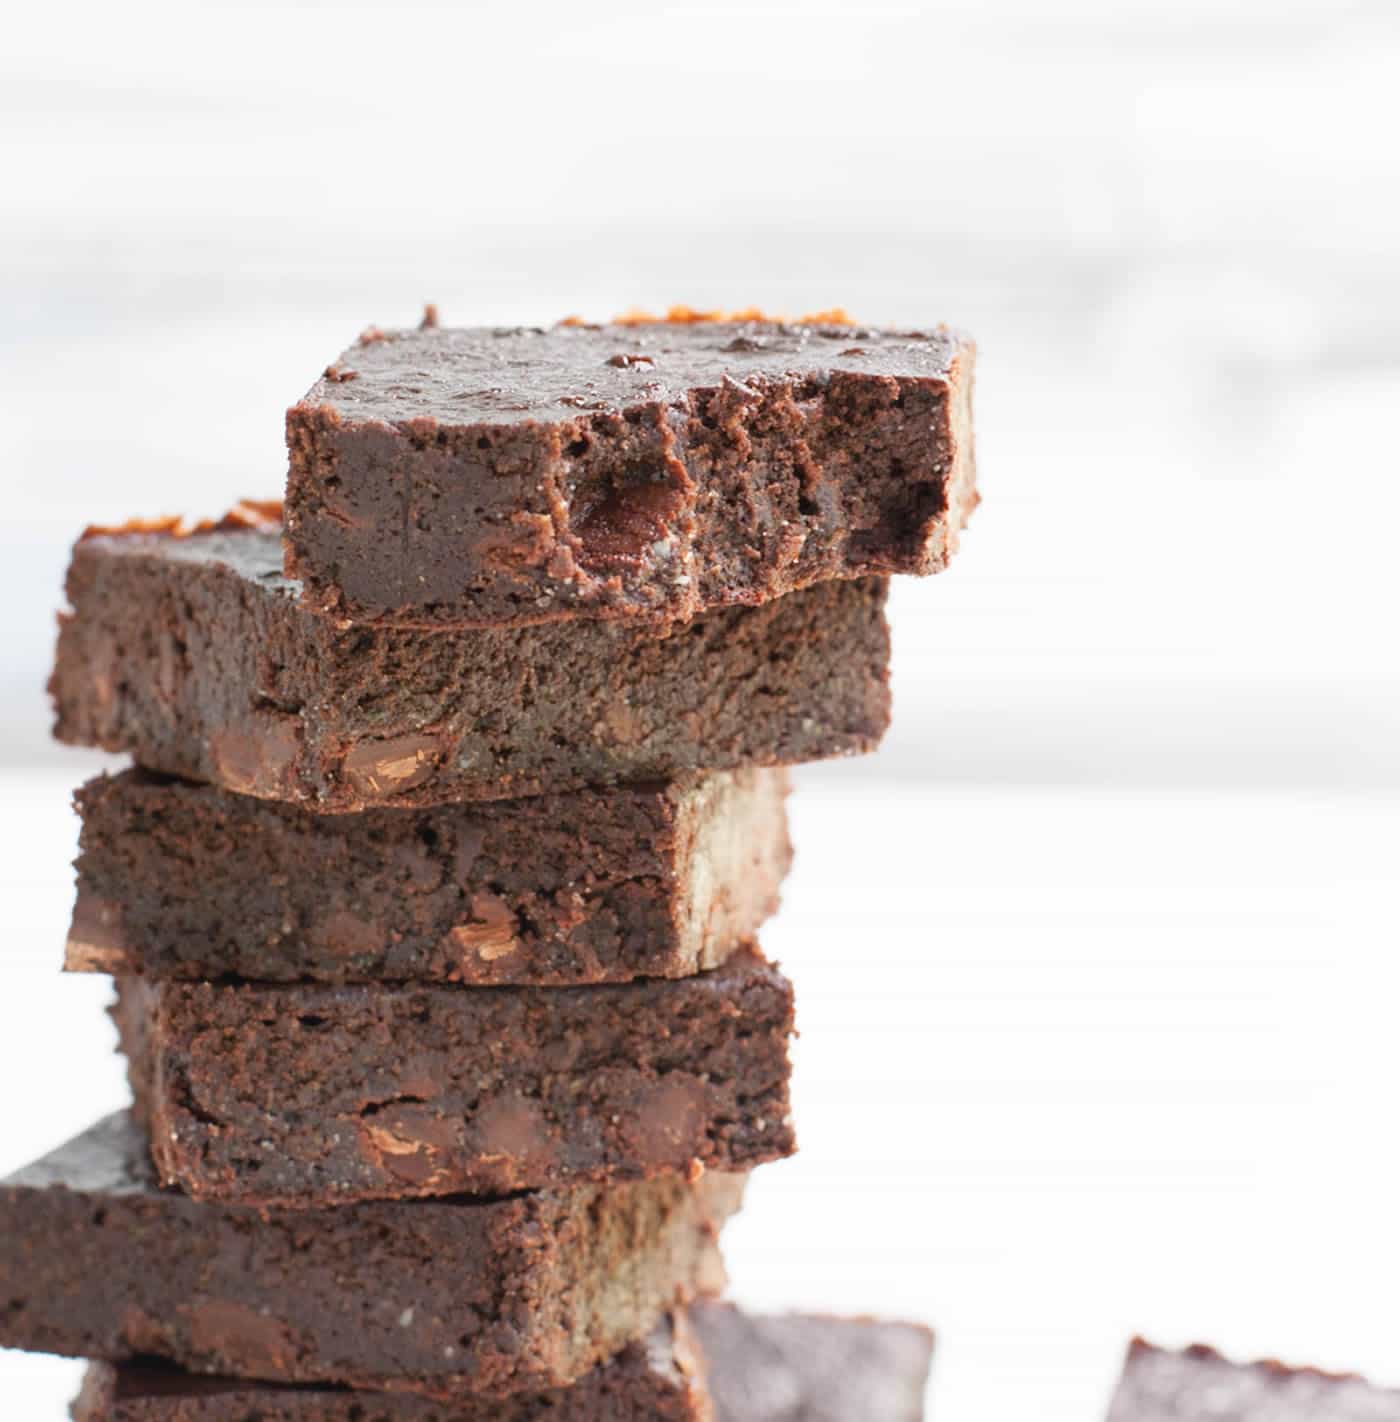 Fudgy Zucchini Brownies. A super fudgy brownie that mixes up easily in your food processor! Lower in sugar, flour and fat than many traditional brownie recipes.